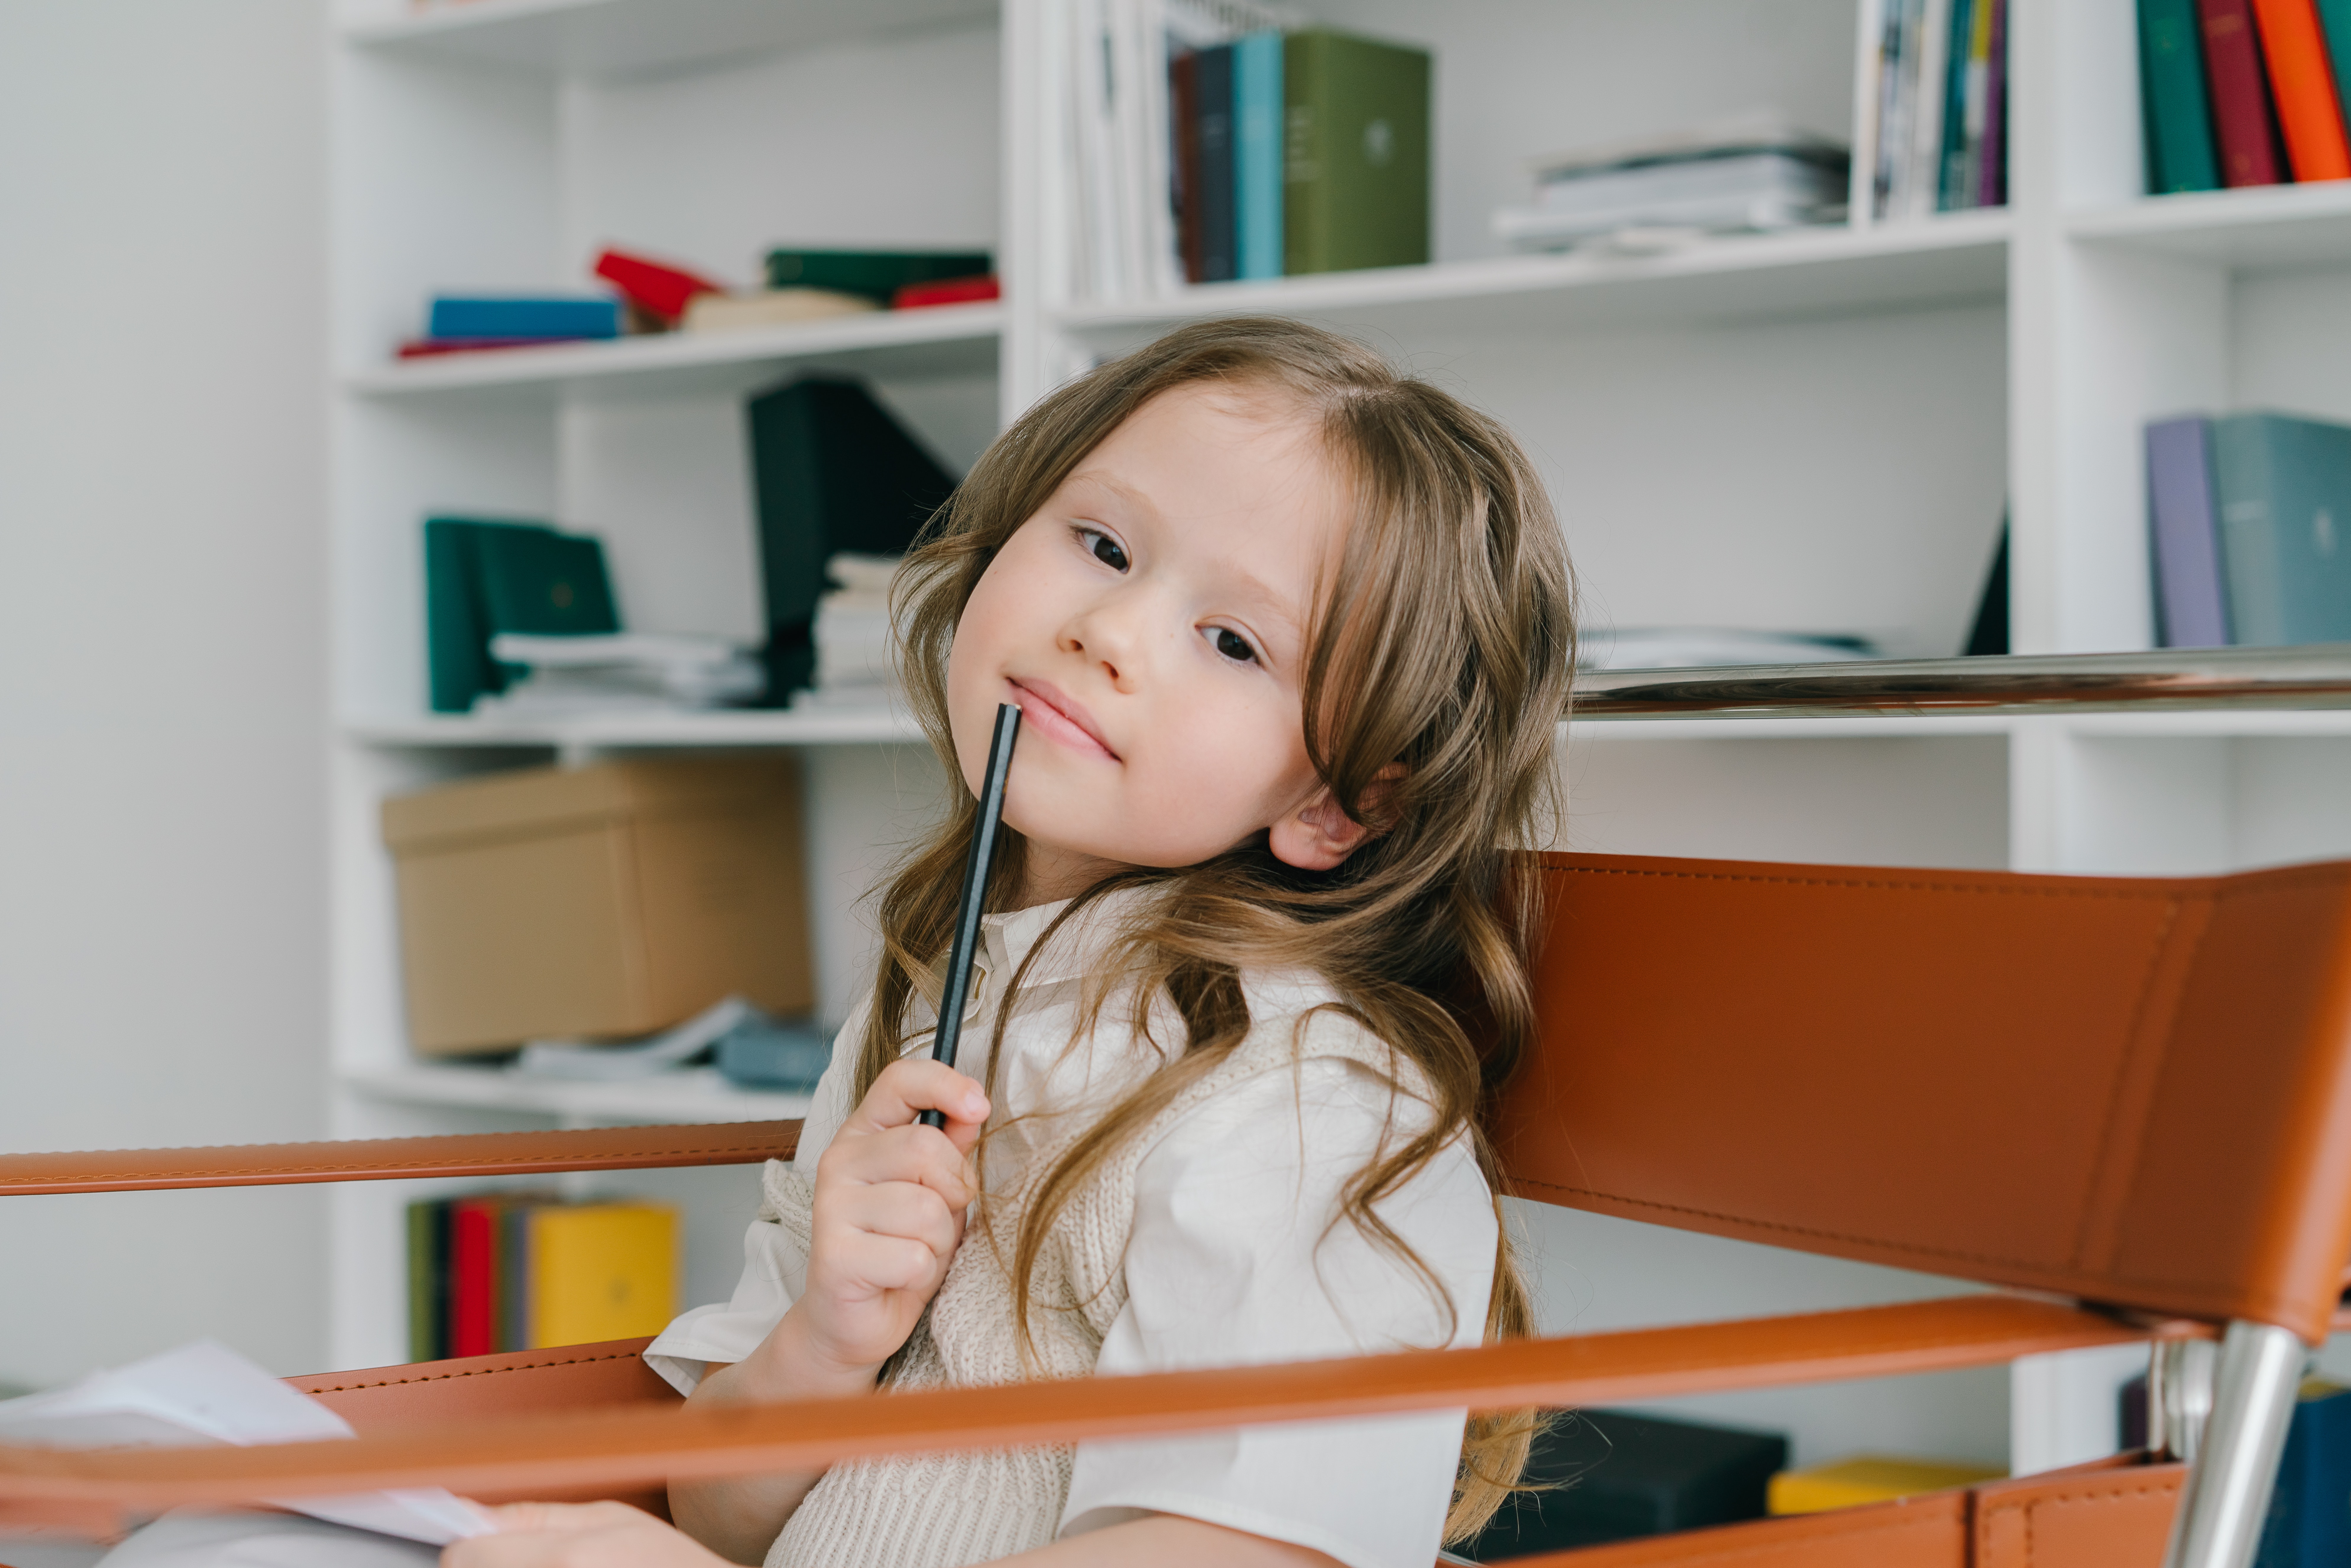 A child holding a pen while thinking